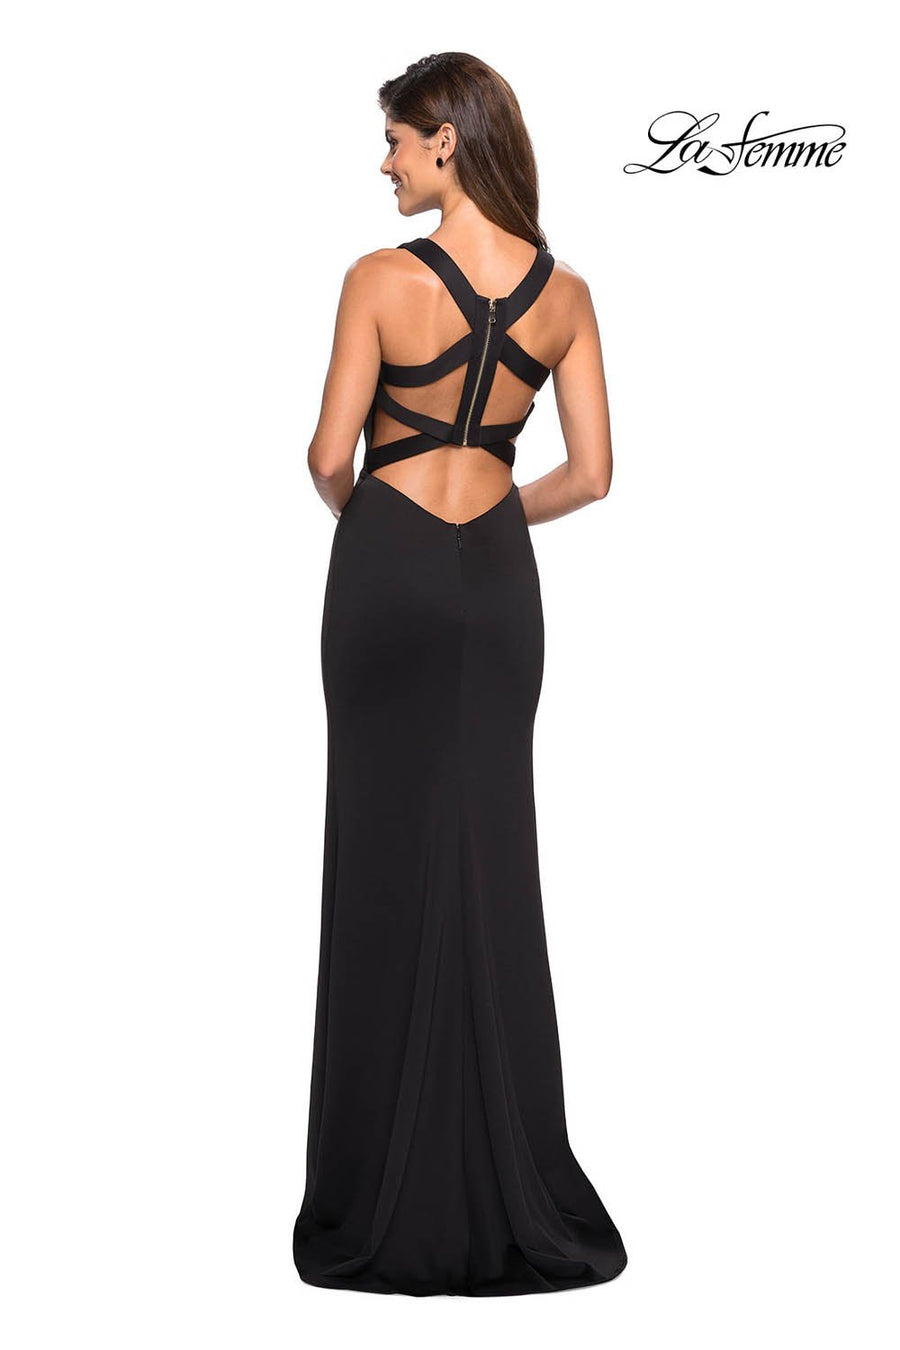 La Femme 27479 prom dress images.  La Femme 27479 is available in these colors: Black, Ivory, Kelly Green, Wine.